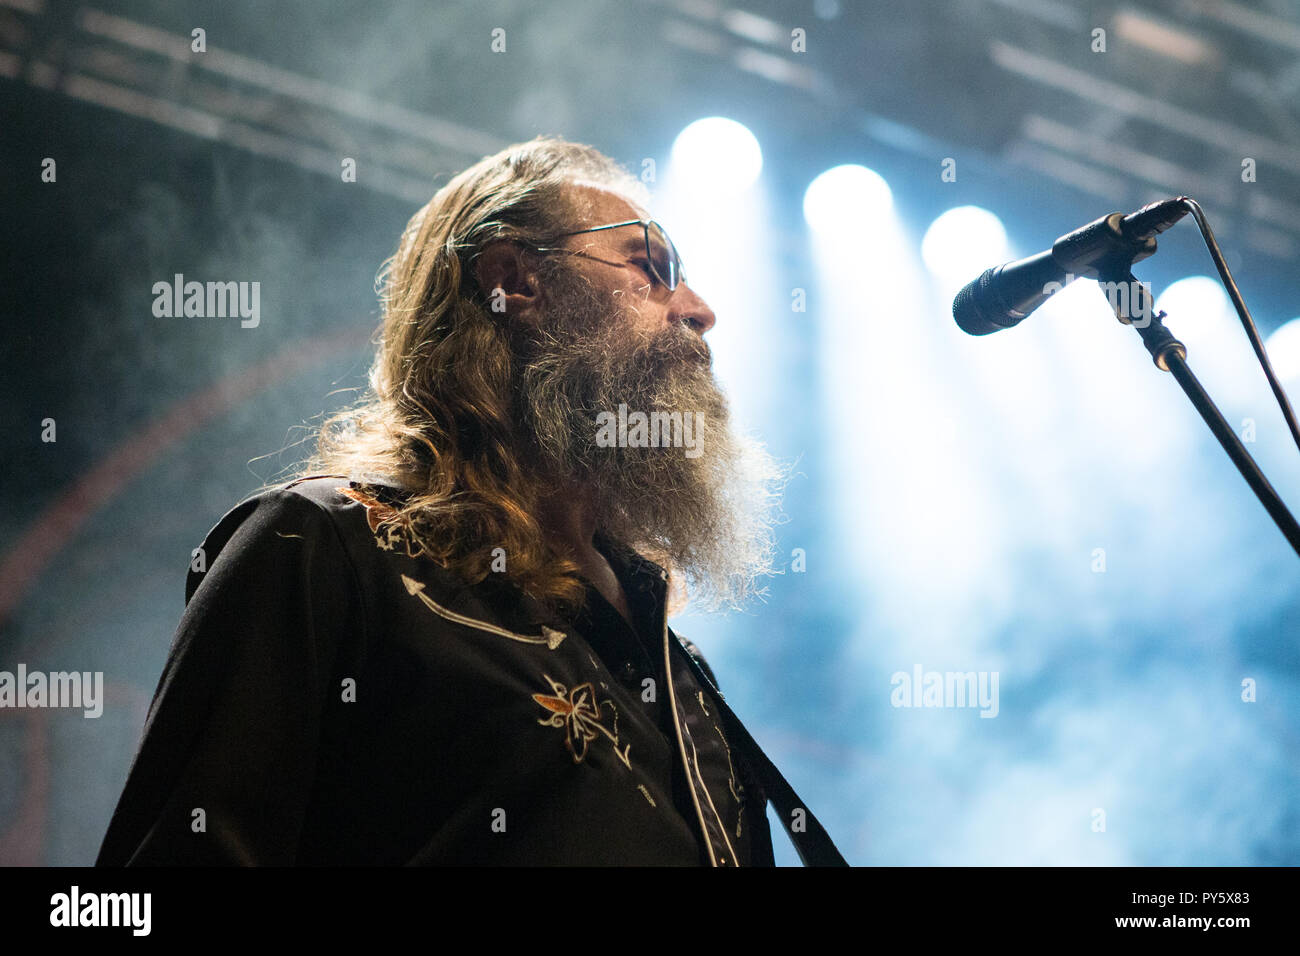 Norway, Oslo - October 25, 2018. The American southern rock band Blackberry Smoke performs live concert at Sentrum Scene in Oslo. Here bass player Richard Turner is seen live on stage. (Photo credit: Gonzales Photo - Per-Otto Oppi). Credit: Gonzales Photo/Alamy Live News Stock Photo